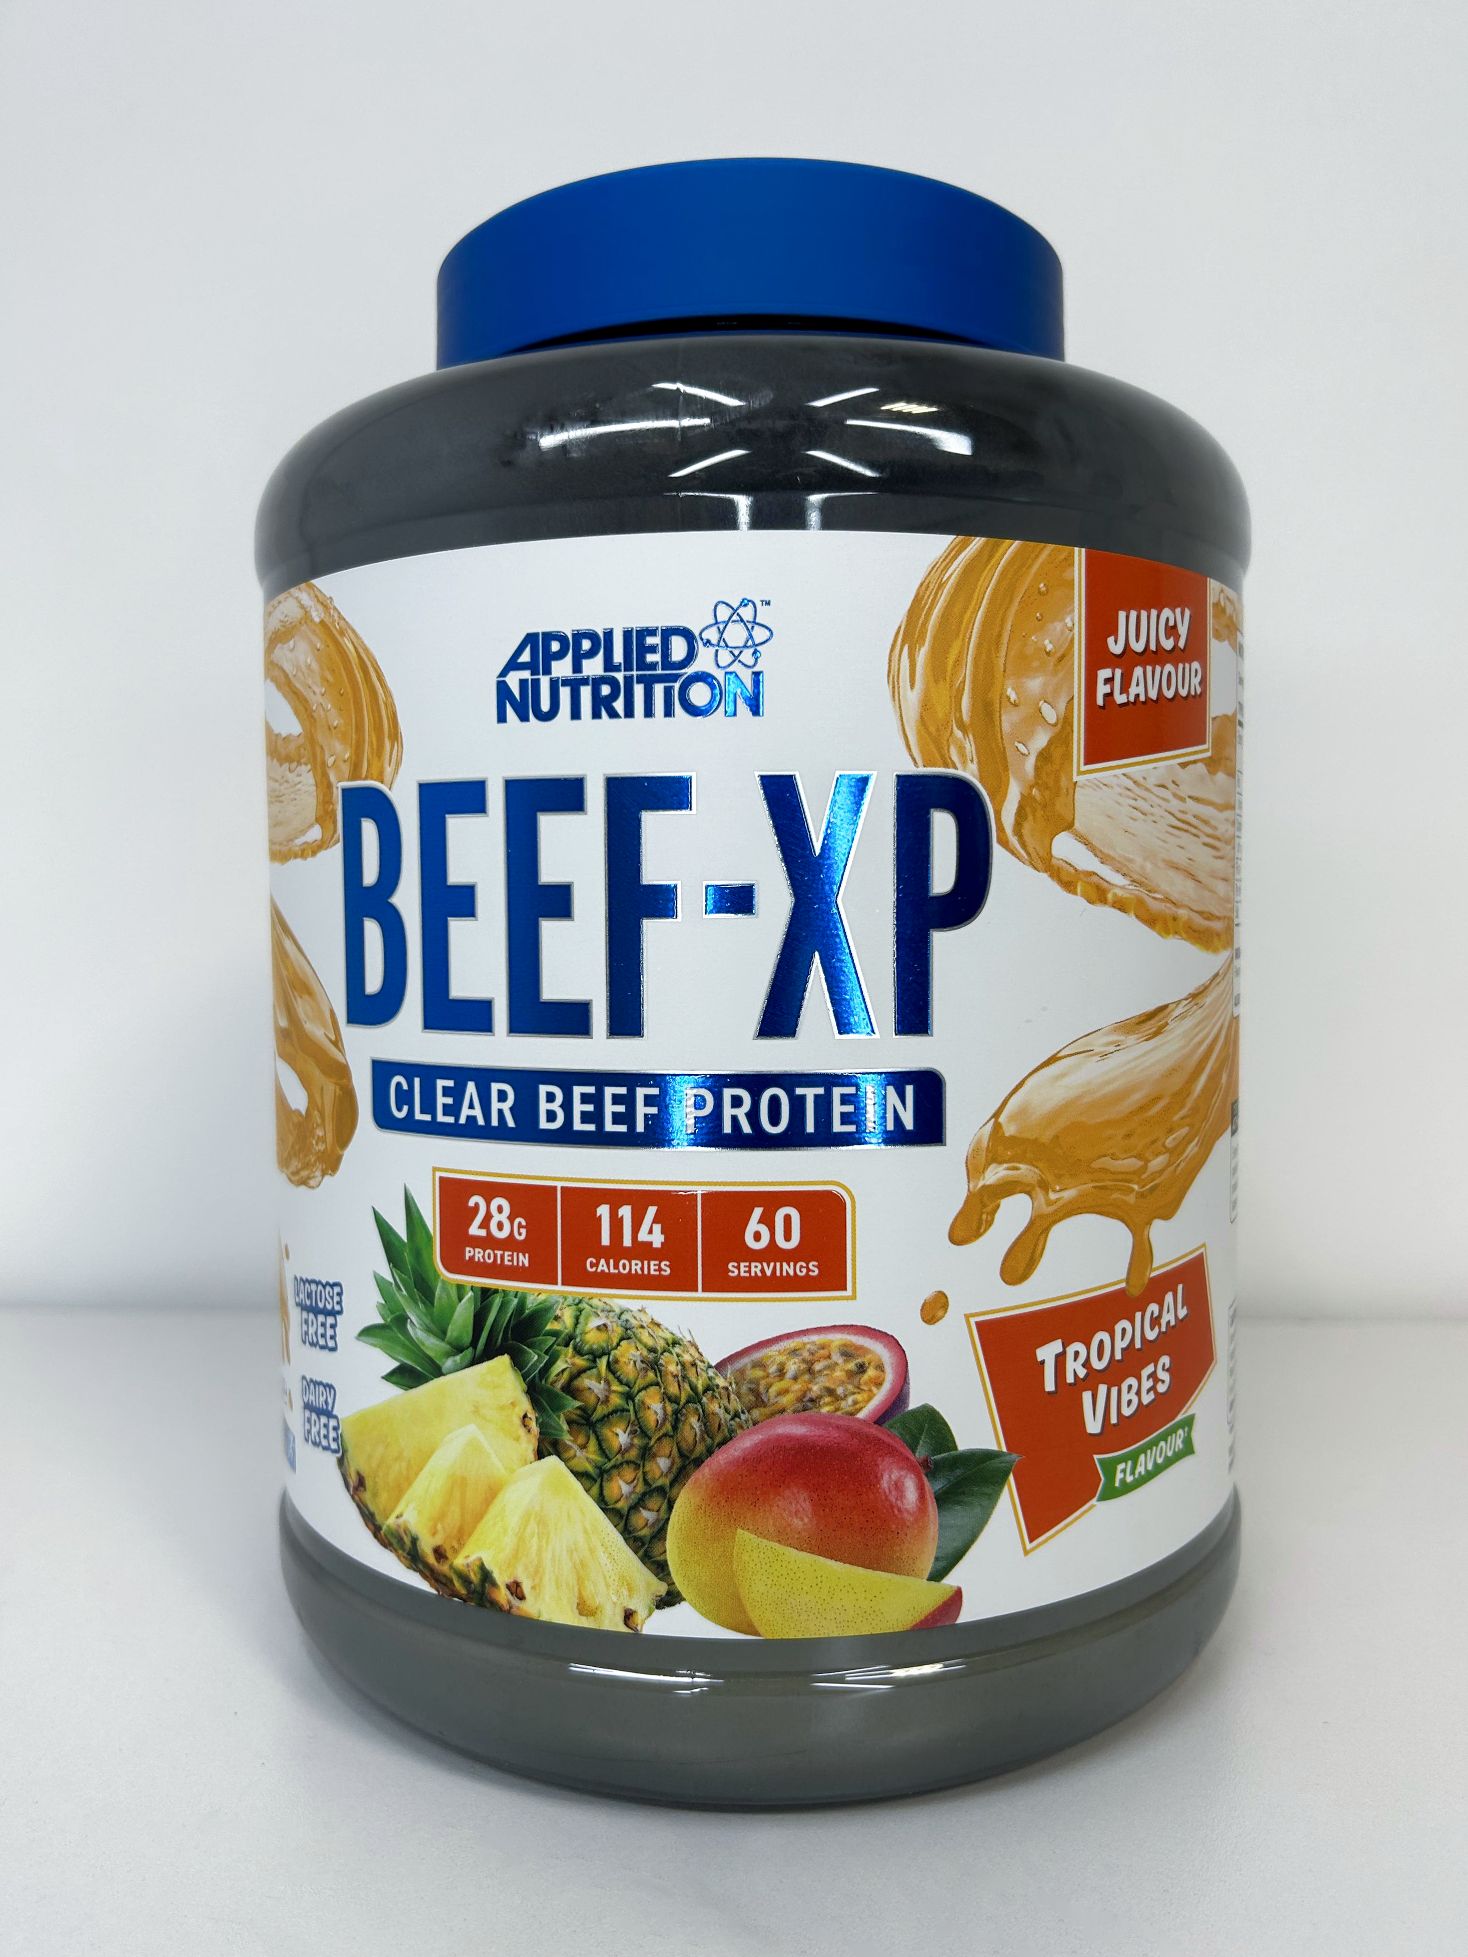 APPLIED NUTRITION CLEAR HYDROLYSED BEEF-XP PROTEIN 1.8KG (60 SERVINGS)